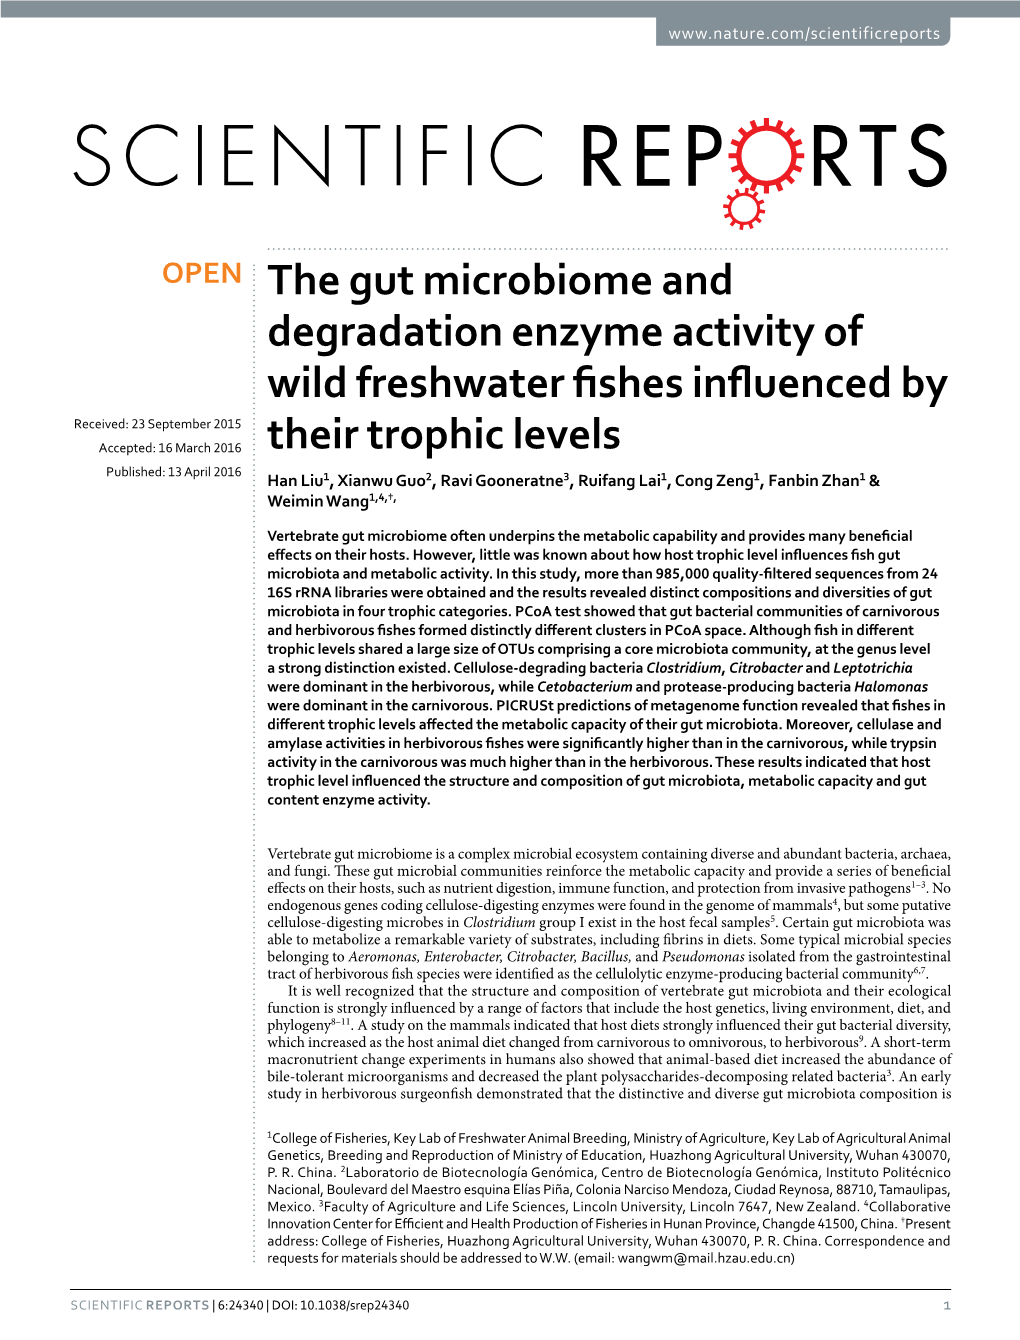 The Gut Microbiome and Degradation Enzyme Activity of Wild Freshwater